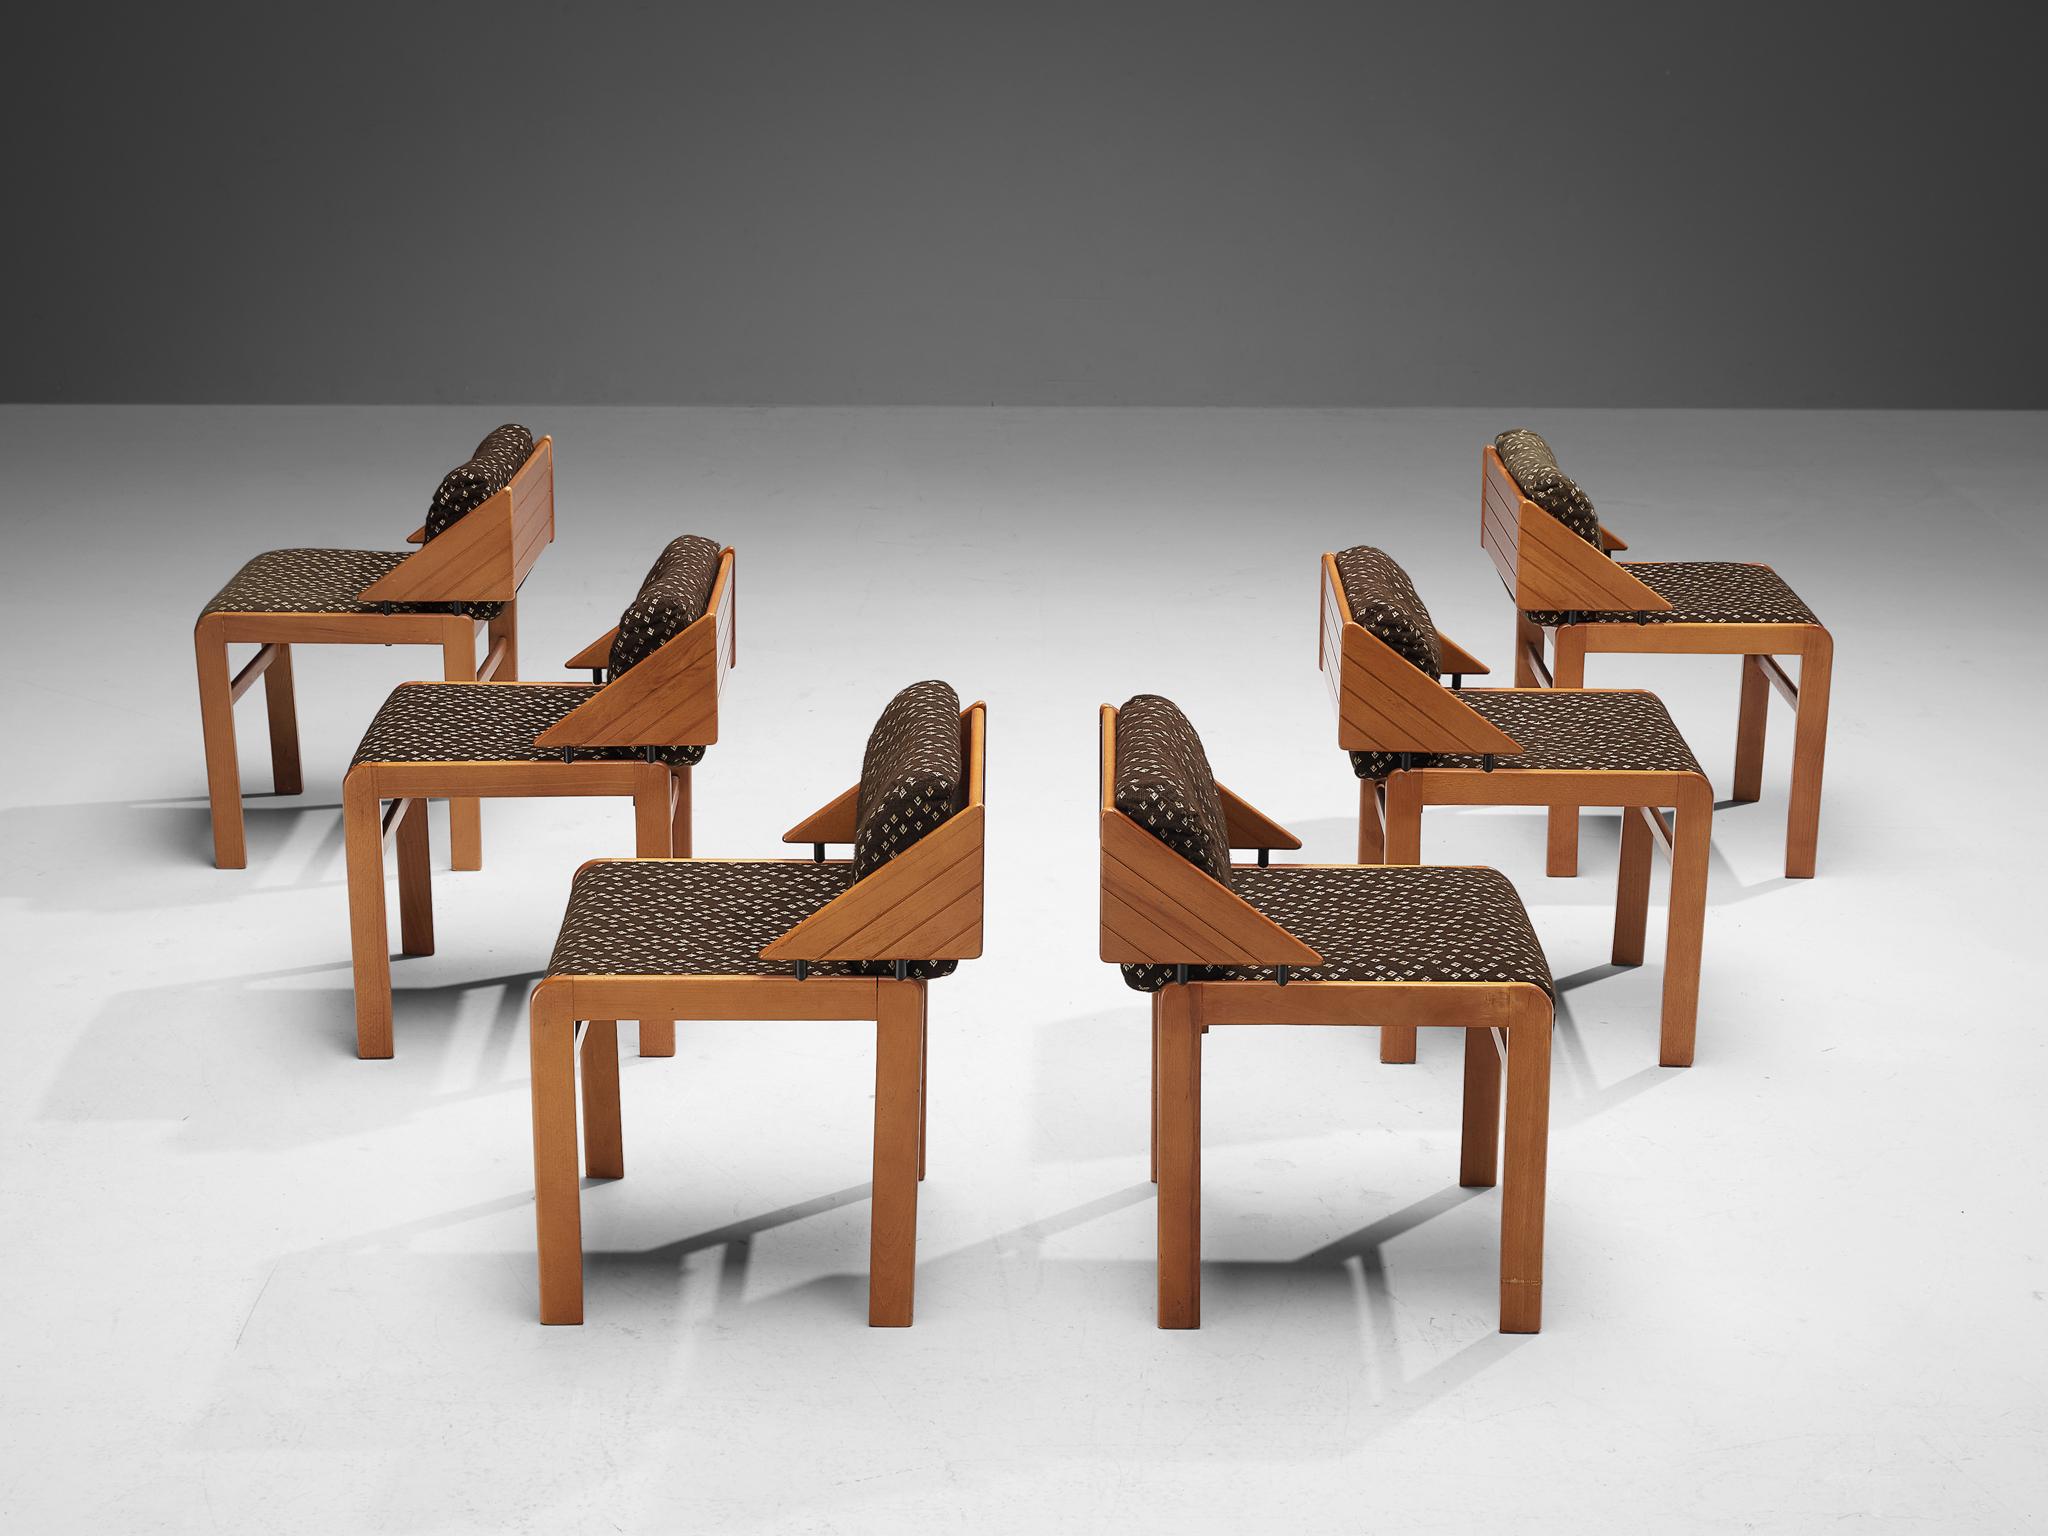 Set of six dining chairs, beech, fabric, Italy, 1980s

This playful set of six dining chairs are designed in the 1980s in Italy. These chairs are executed in beech wood and dark upholstery with a white detailed print. The backs have interesting thin